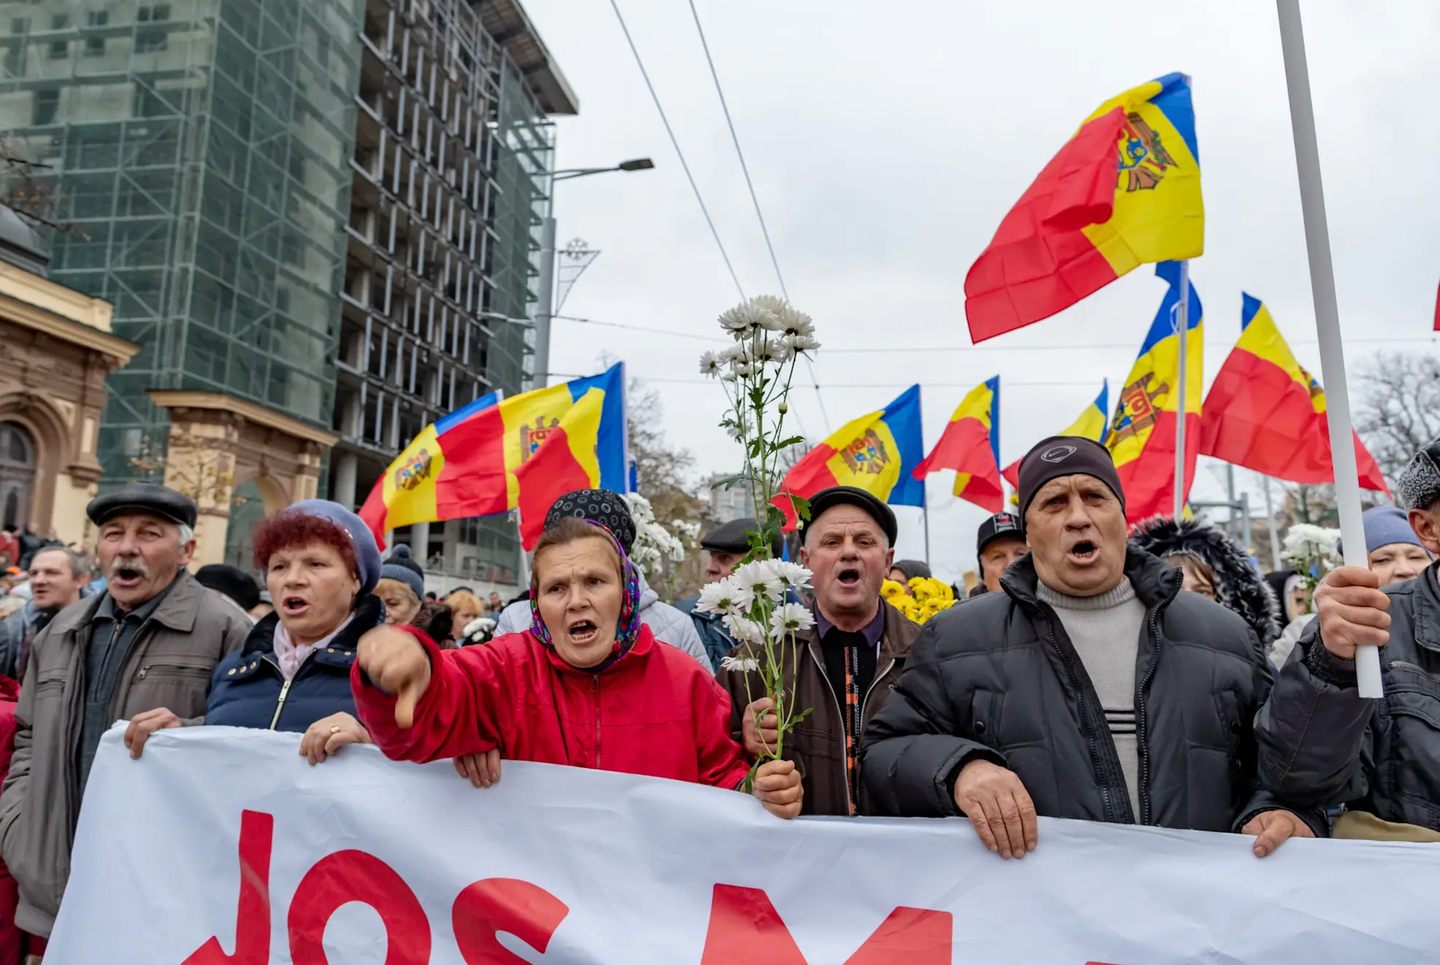 Protesters calling upon Moldova’s pro-Western leaders to leave the office during a march in the capital, Chisinau, on November 13, 2022.&nbsp;<em>Photo by Vudi Xhymshiti/Anadolu Agency via Getty Images</em>